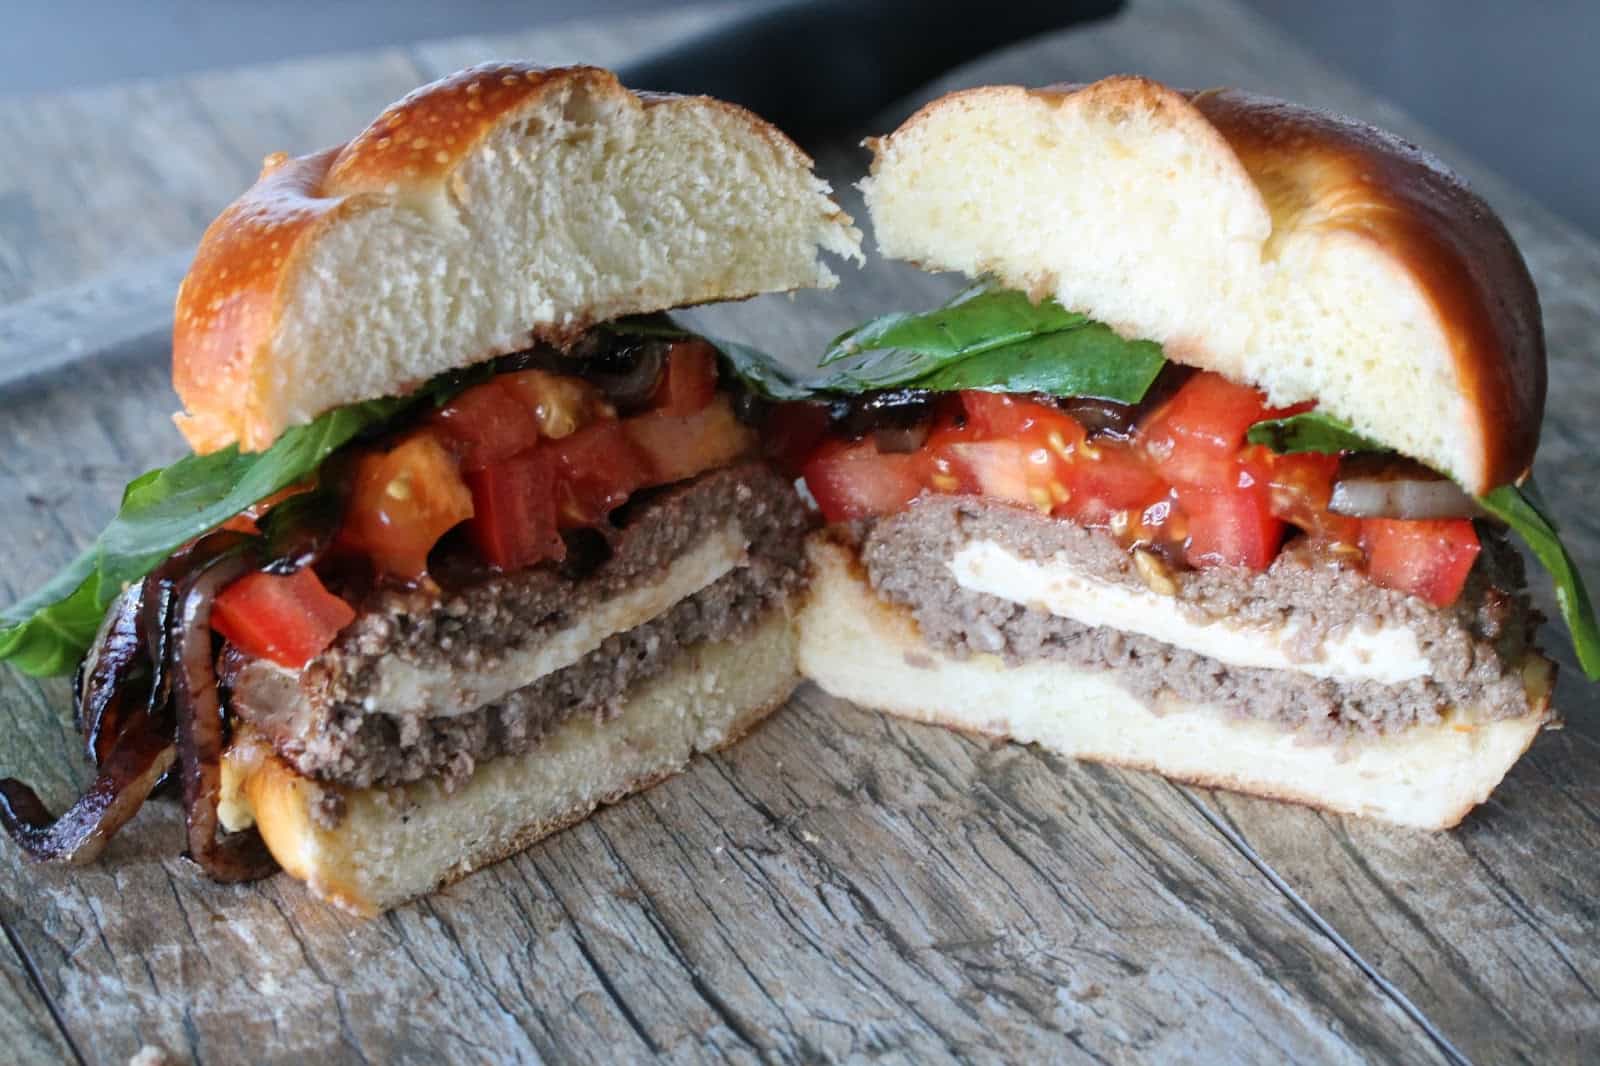 Stuffed Caprese Burger cut in half to show layers of mozzarella, tomatoes, and basil with burger